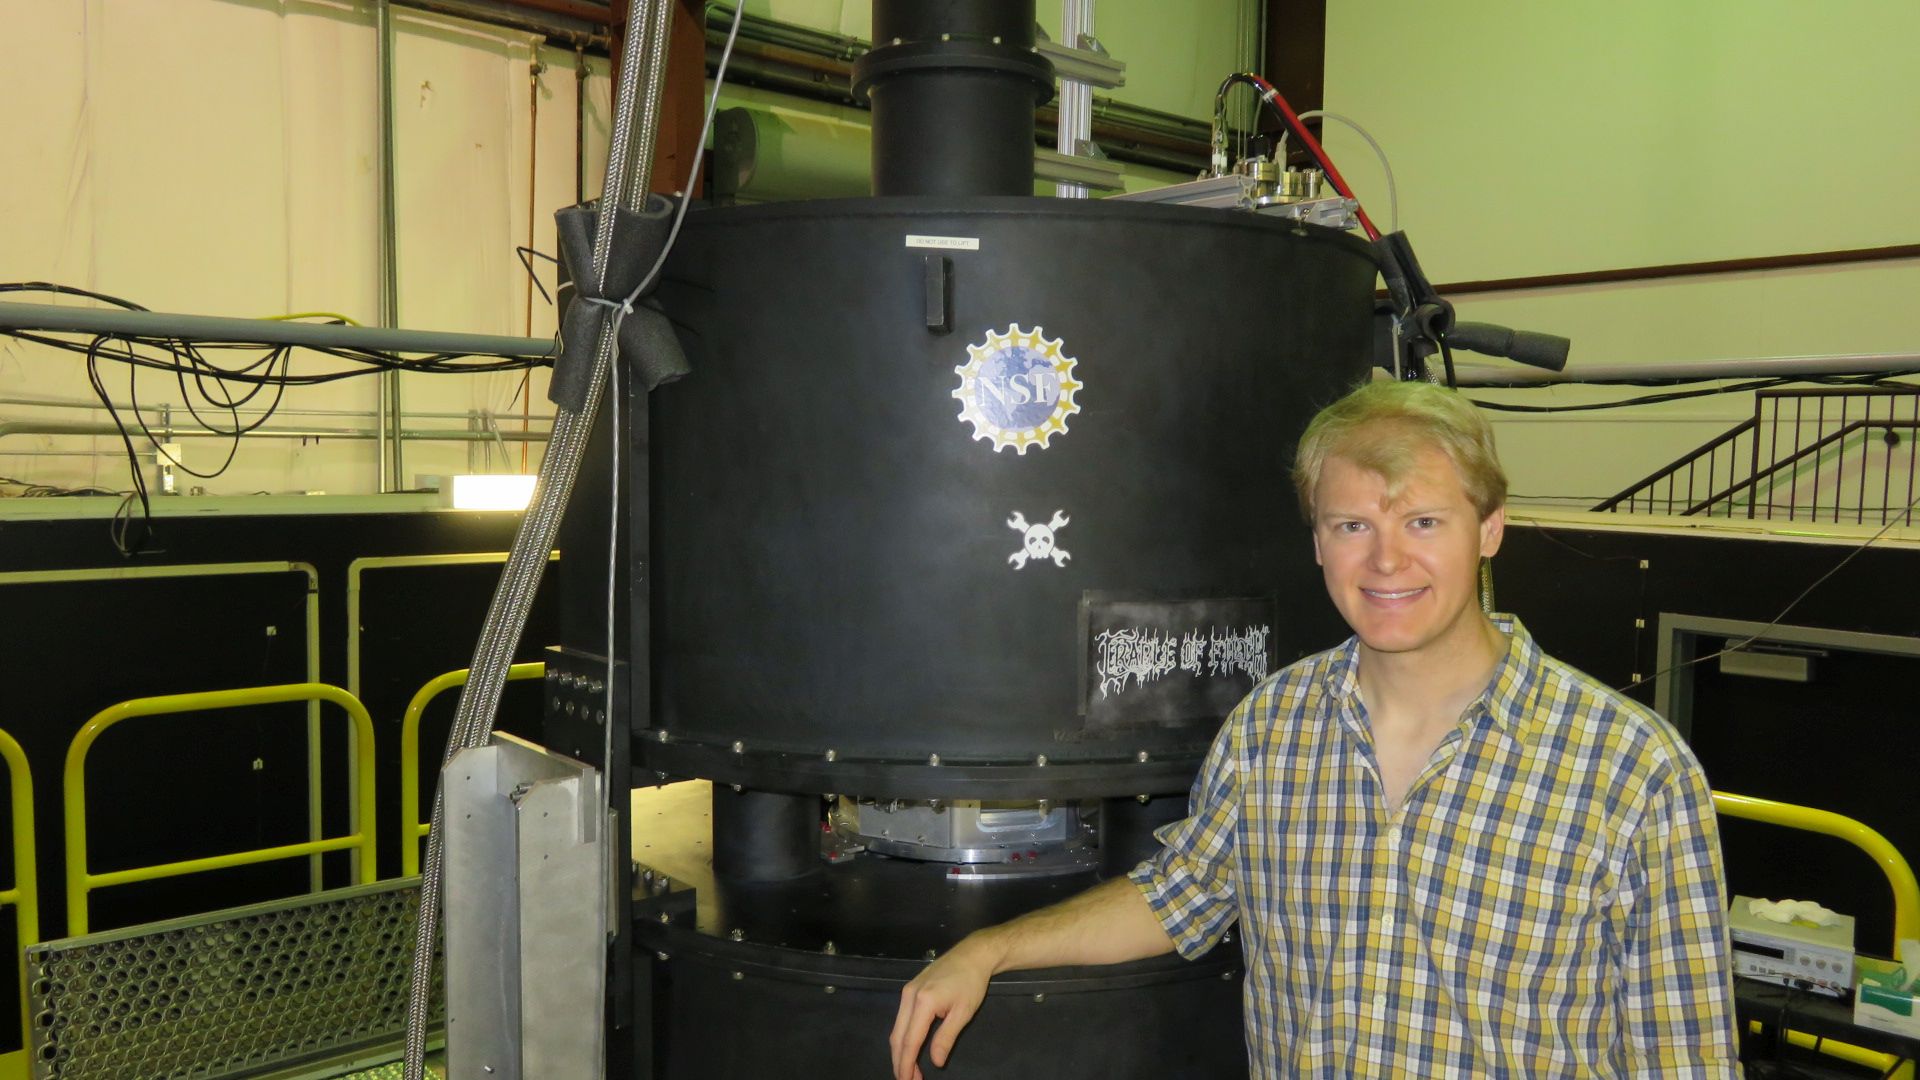 Article by graduate student Taylor Hall and the Auburn Team featured on the cover of Physics of Plasmas